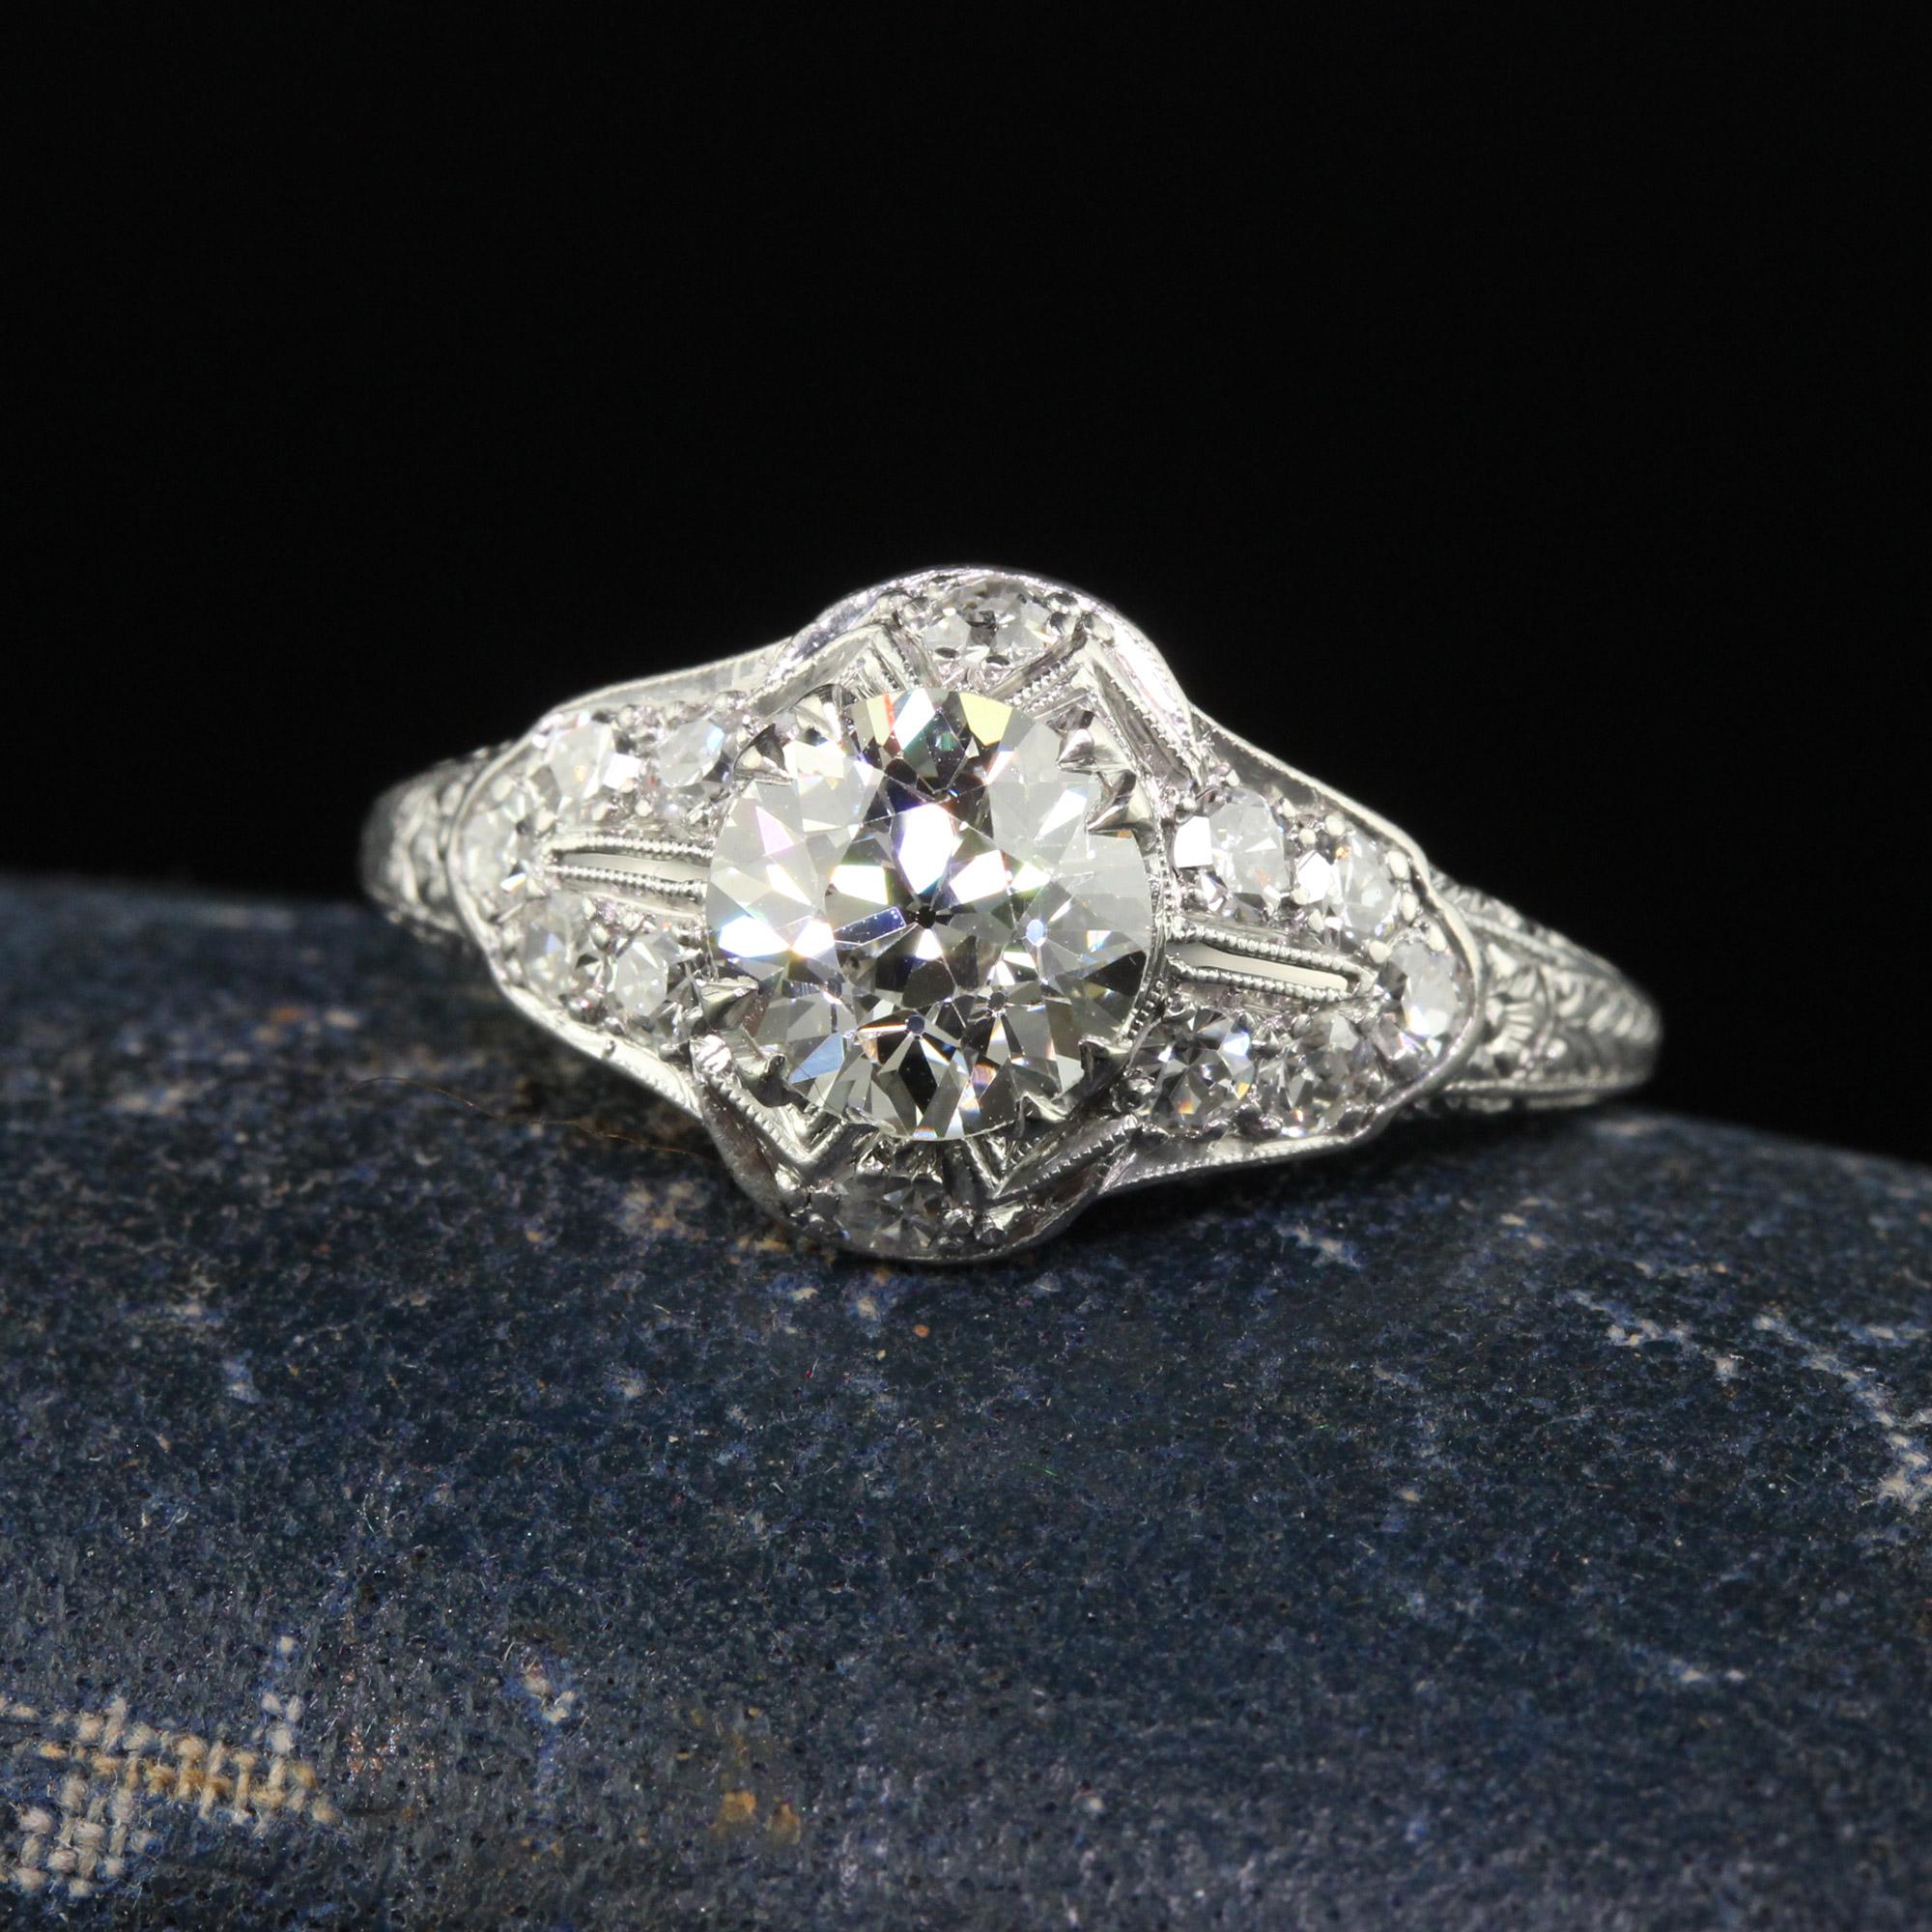 Beautiful Antique Art Deco Platinum Old Euro Diamond Filigree Engagement Ring - GIA. This incredible engagement ring is crafted in platinum. The center holds an old European cut diamond that has a GIA report. It is surrounded by old cut diamonds on